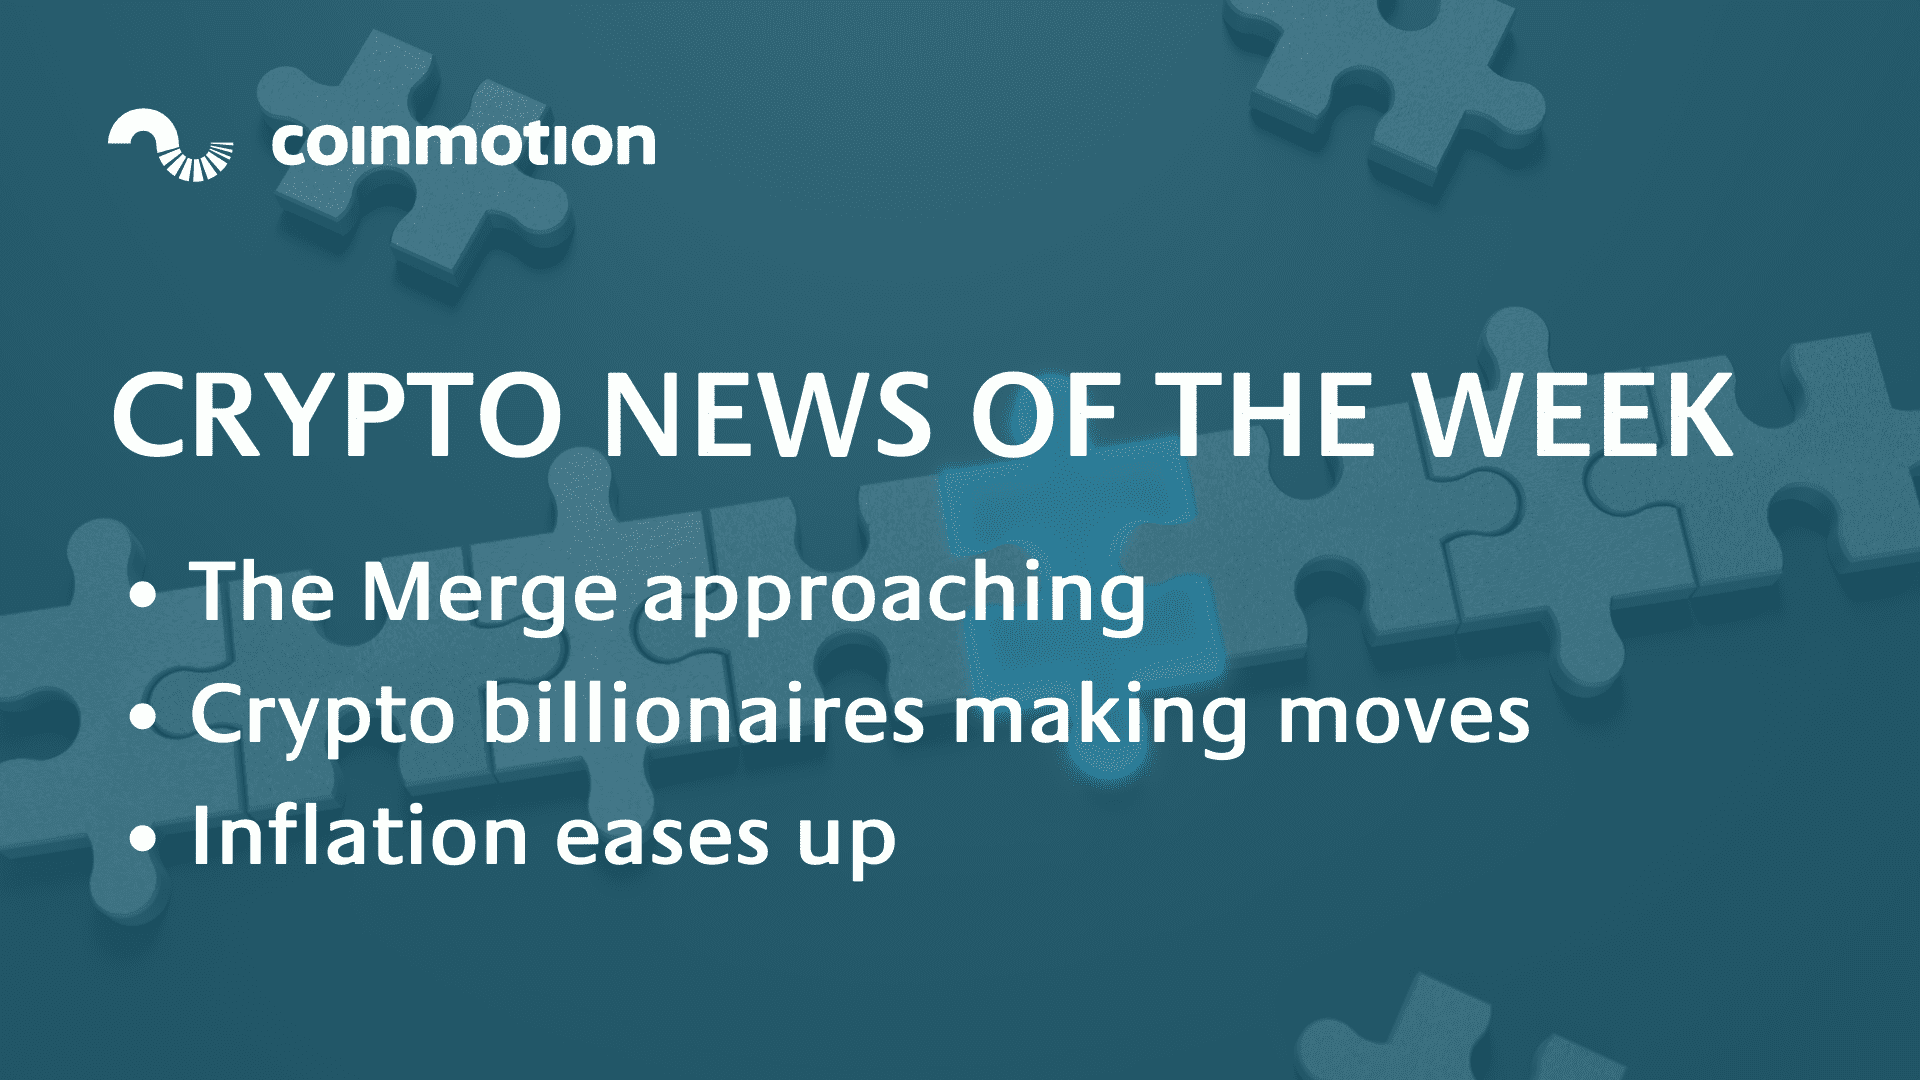 Ethereum’s The Merge confirmed, crypto billionaires making moves, inflation eases up a bit